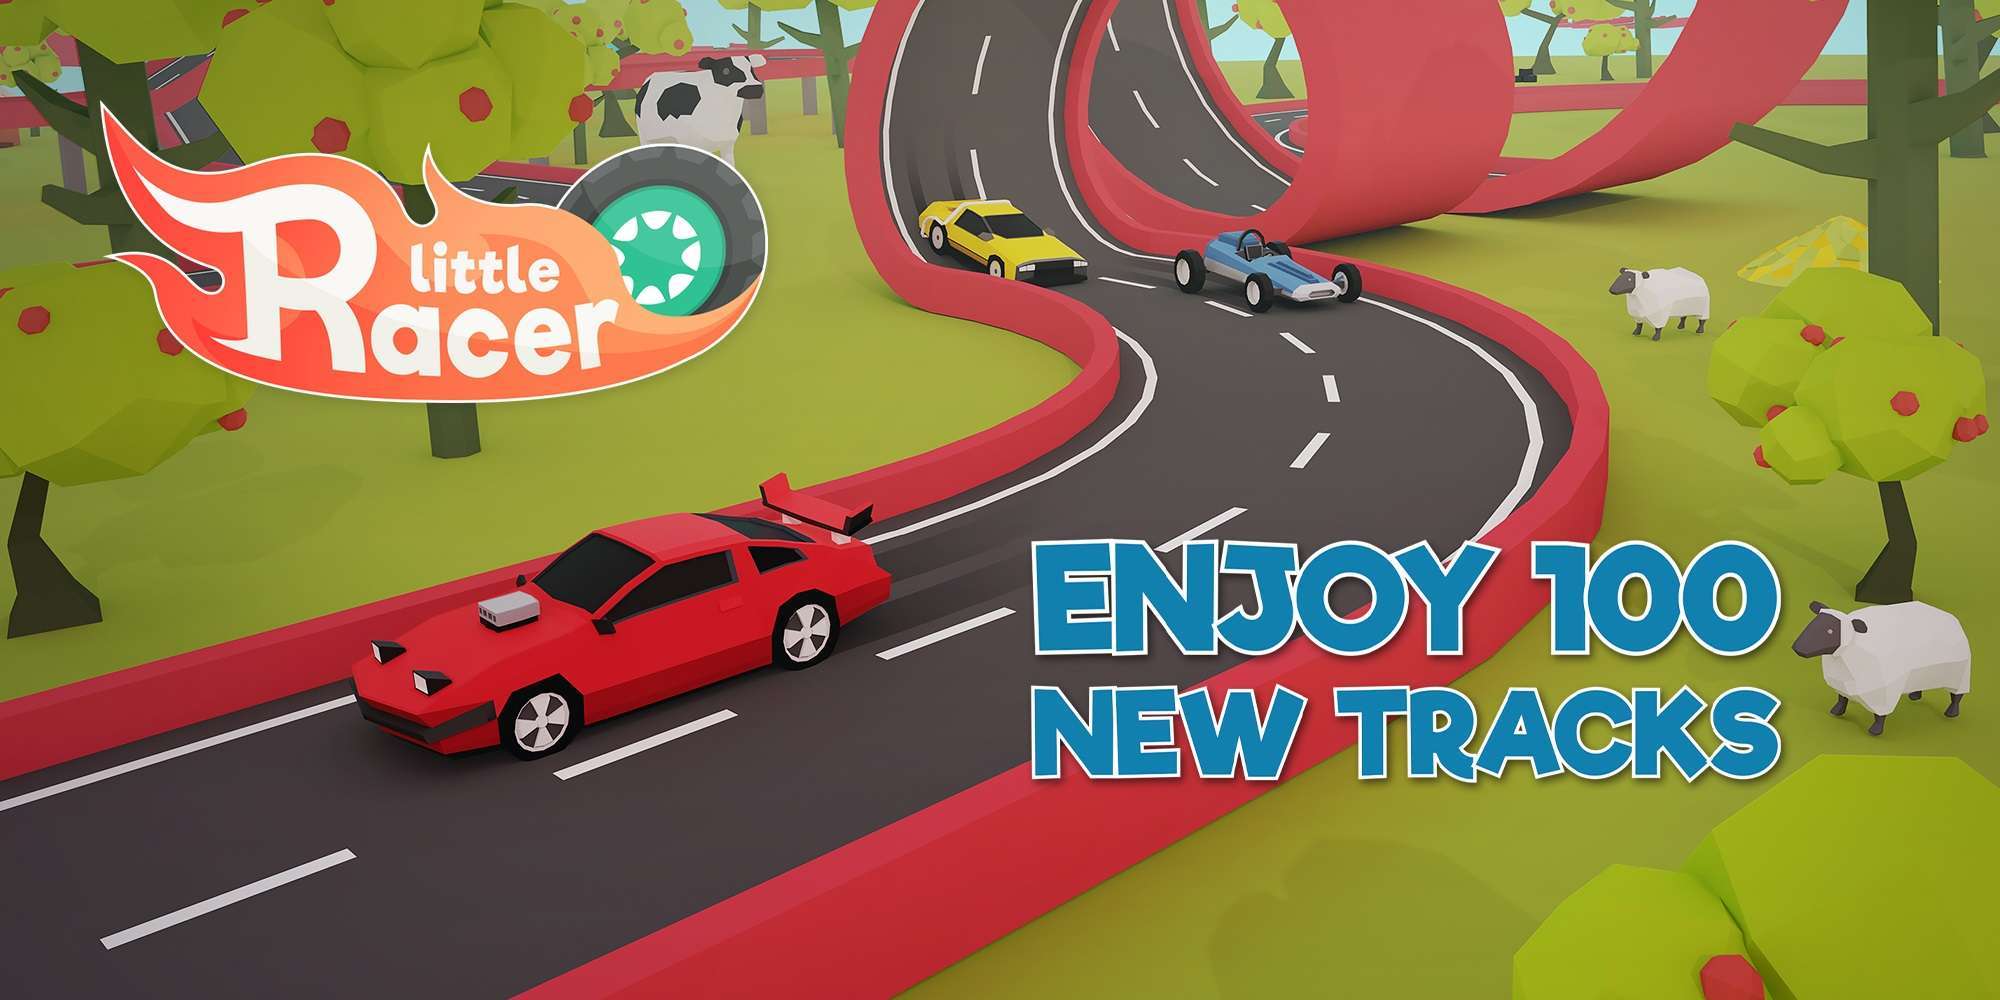 LITTLE RACER Nintendo Switch Racing Game New Mega-Update Includes 100 New Free Tracks